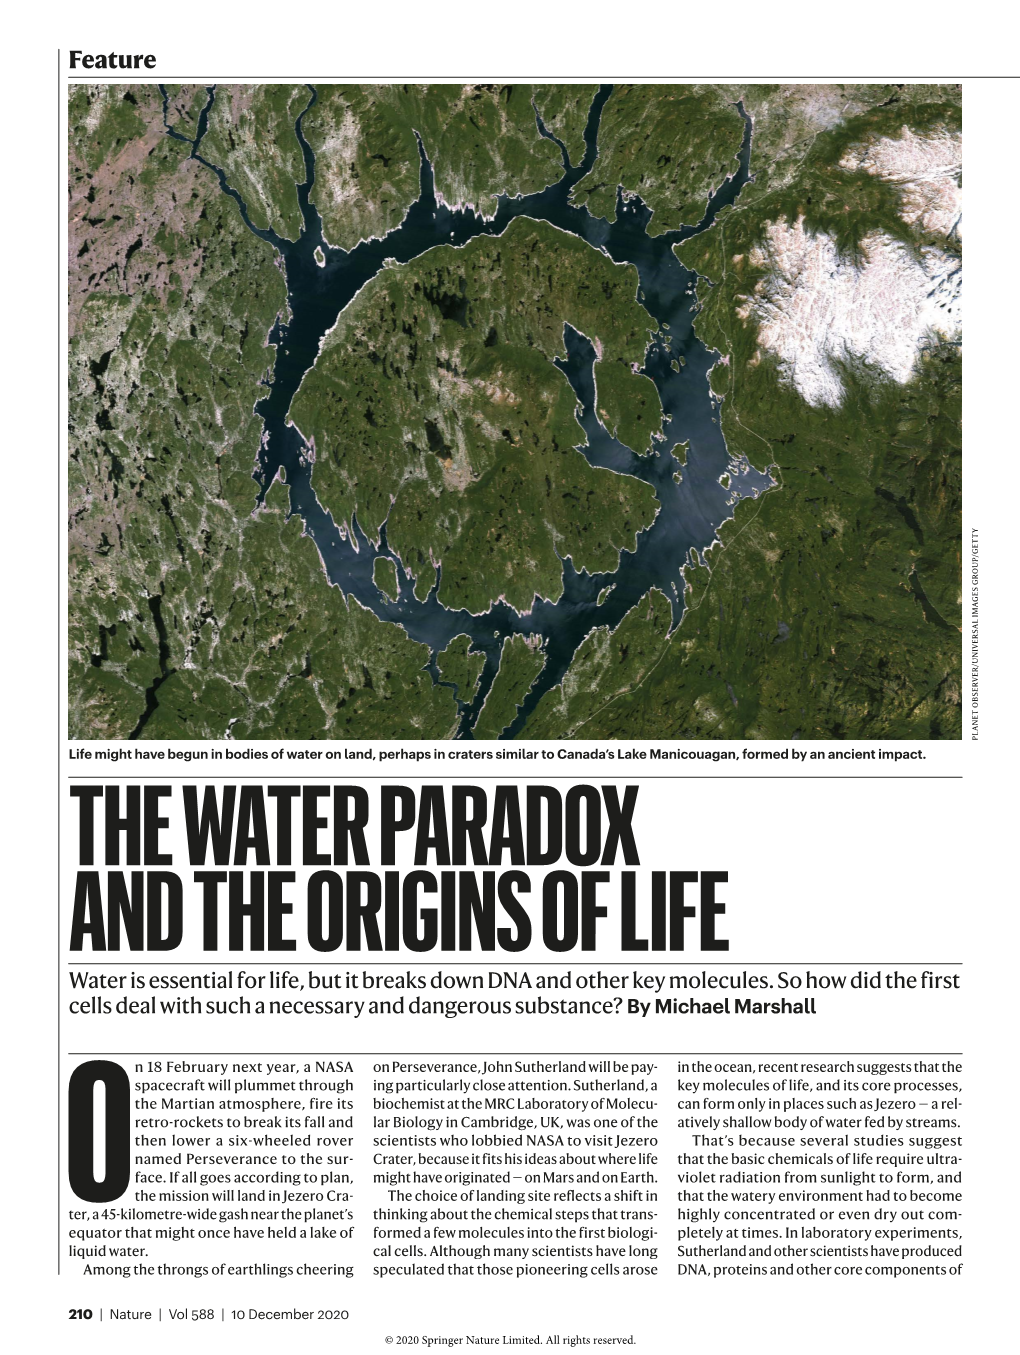 THE WATER PARADOX and the ORIGINS of LIFE Water Is Essential for Life, but It Breaks Down DNA and Other Key Molecules